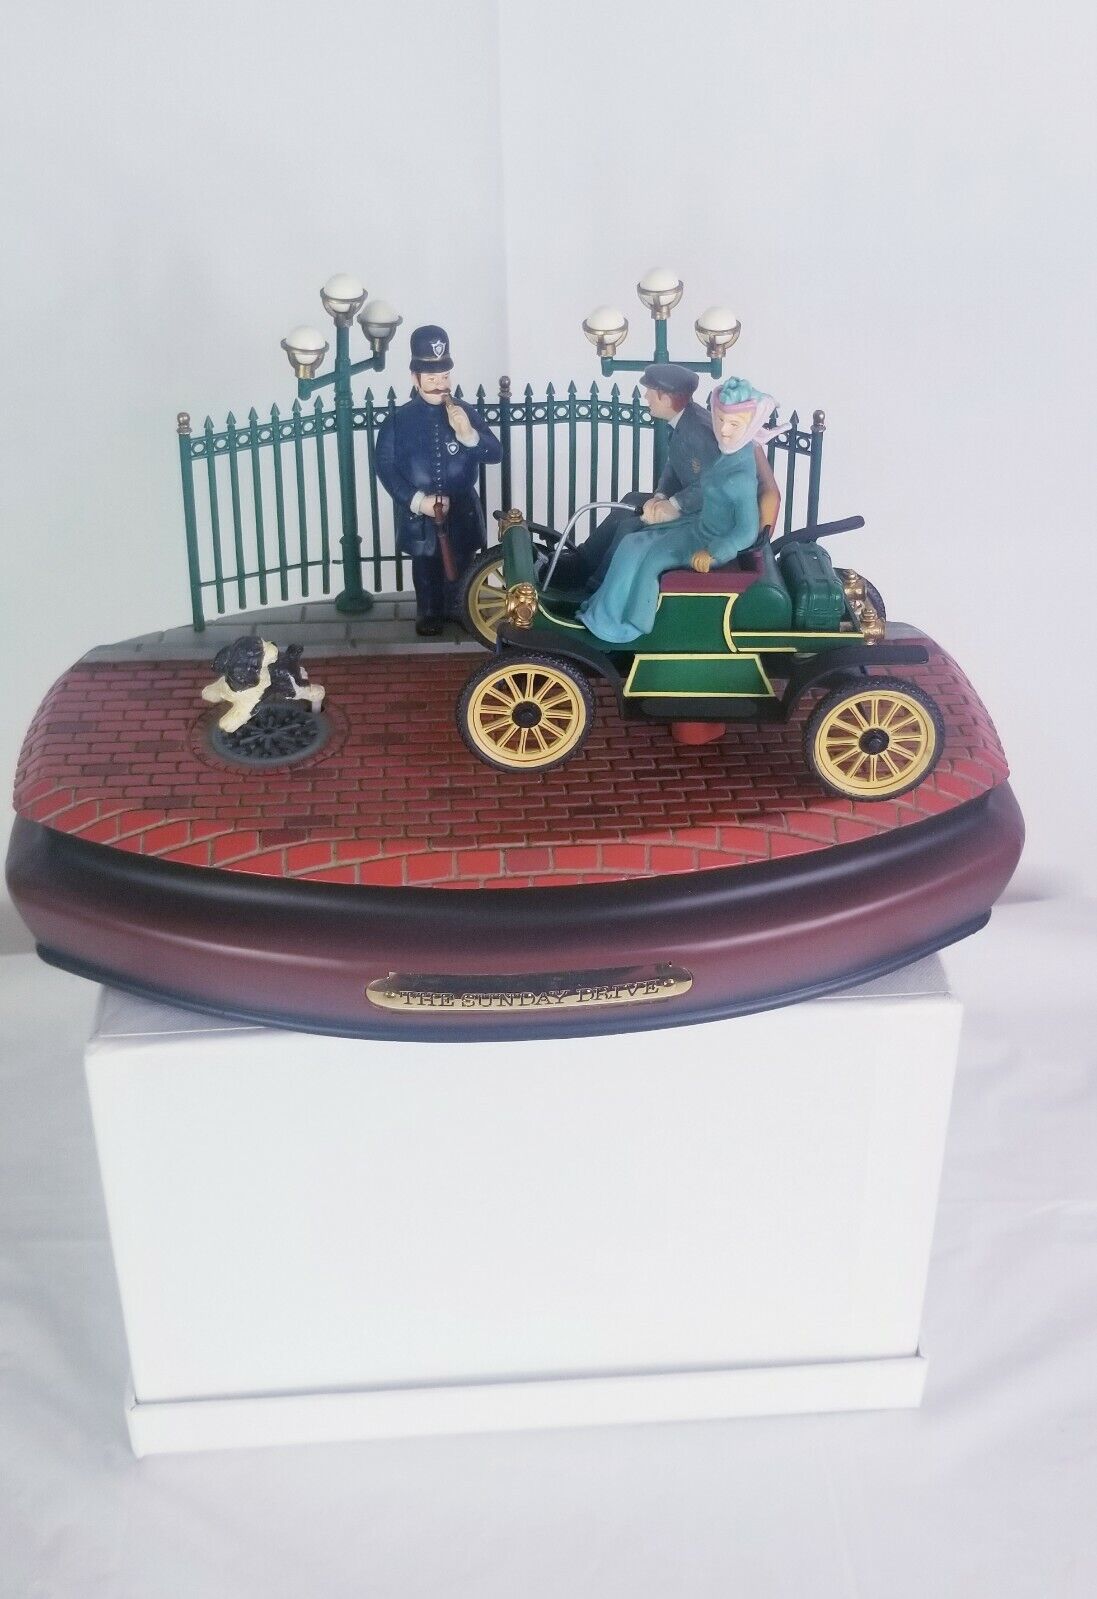 1988 Enesco The Sunday Drive Illuminated Action Musical Limited Edition 